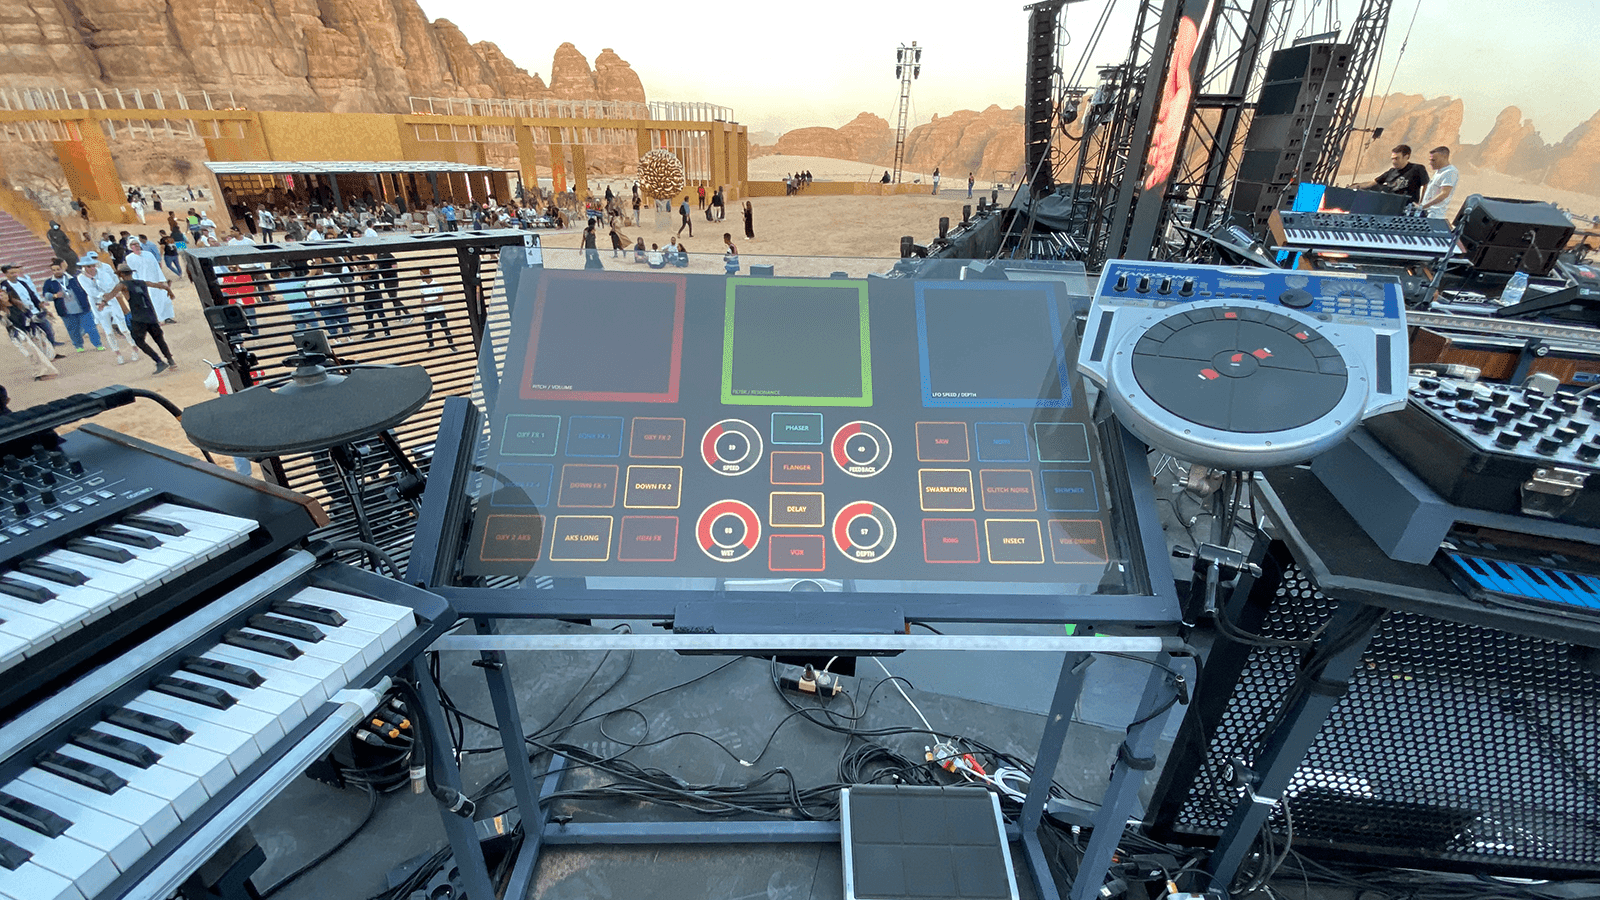 DJ interactive table made with PCAP touch technology